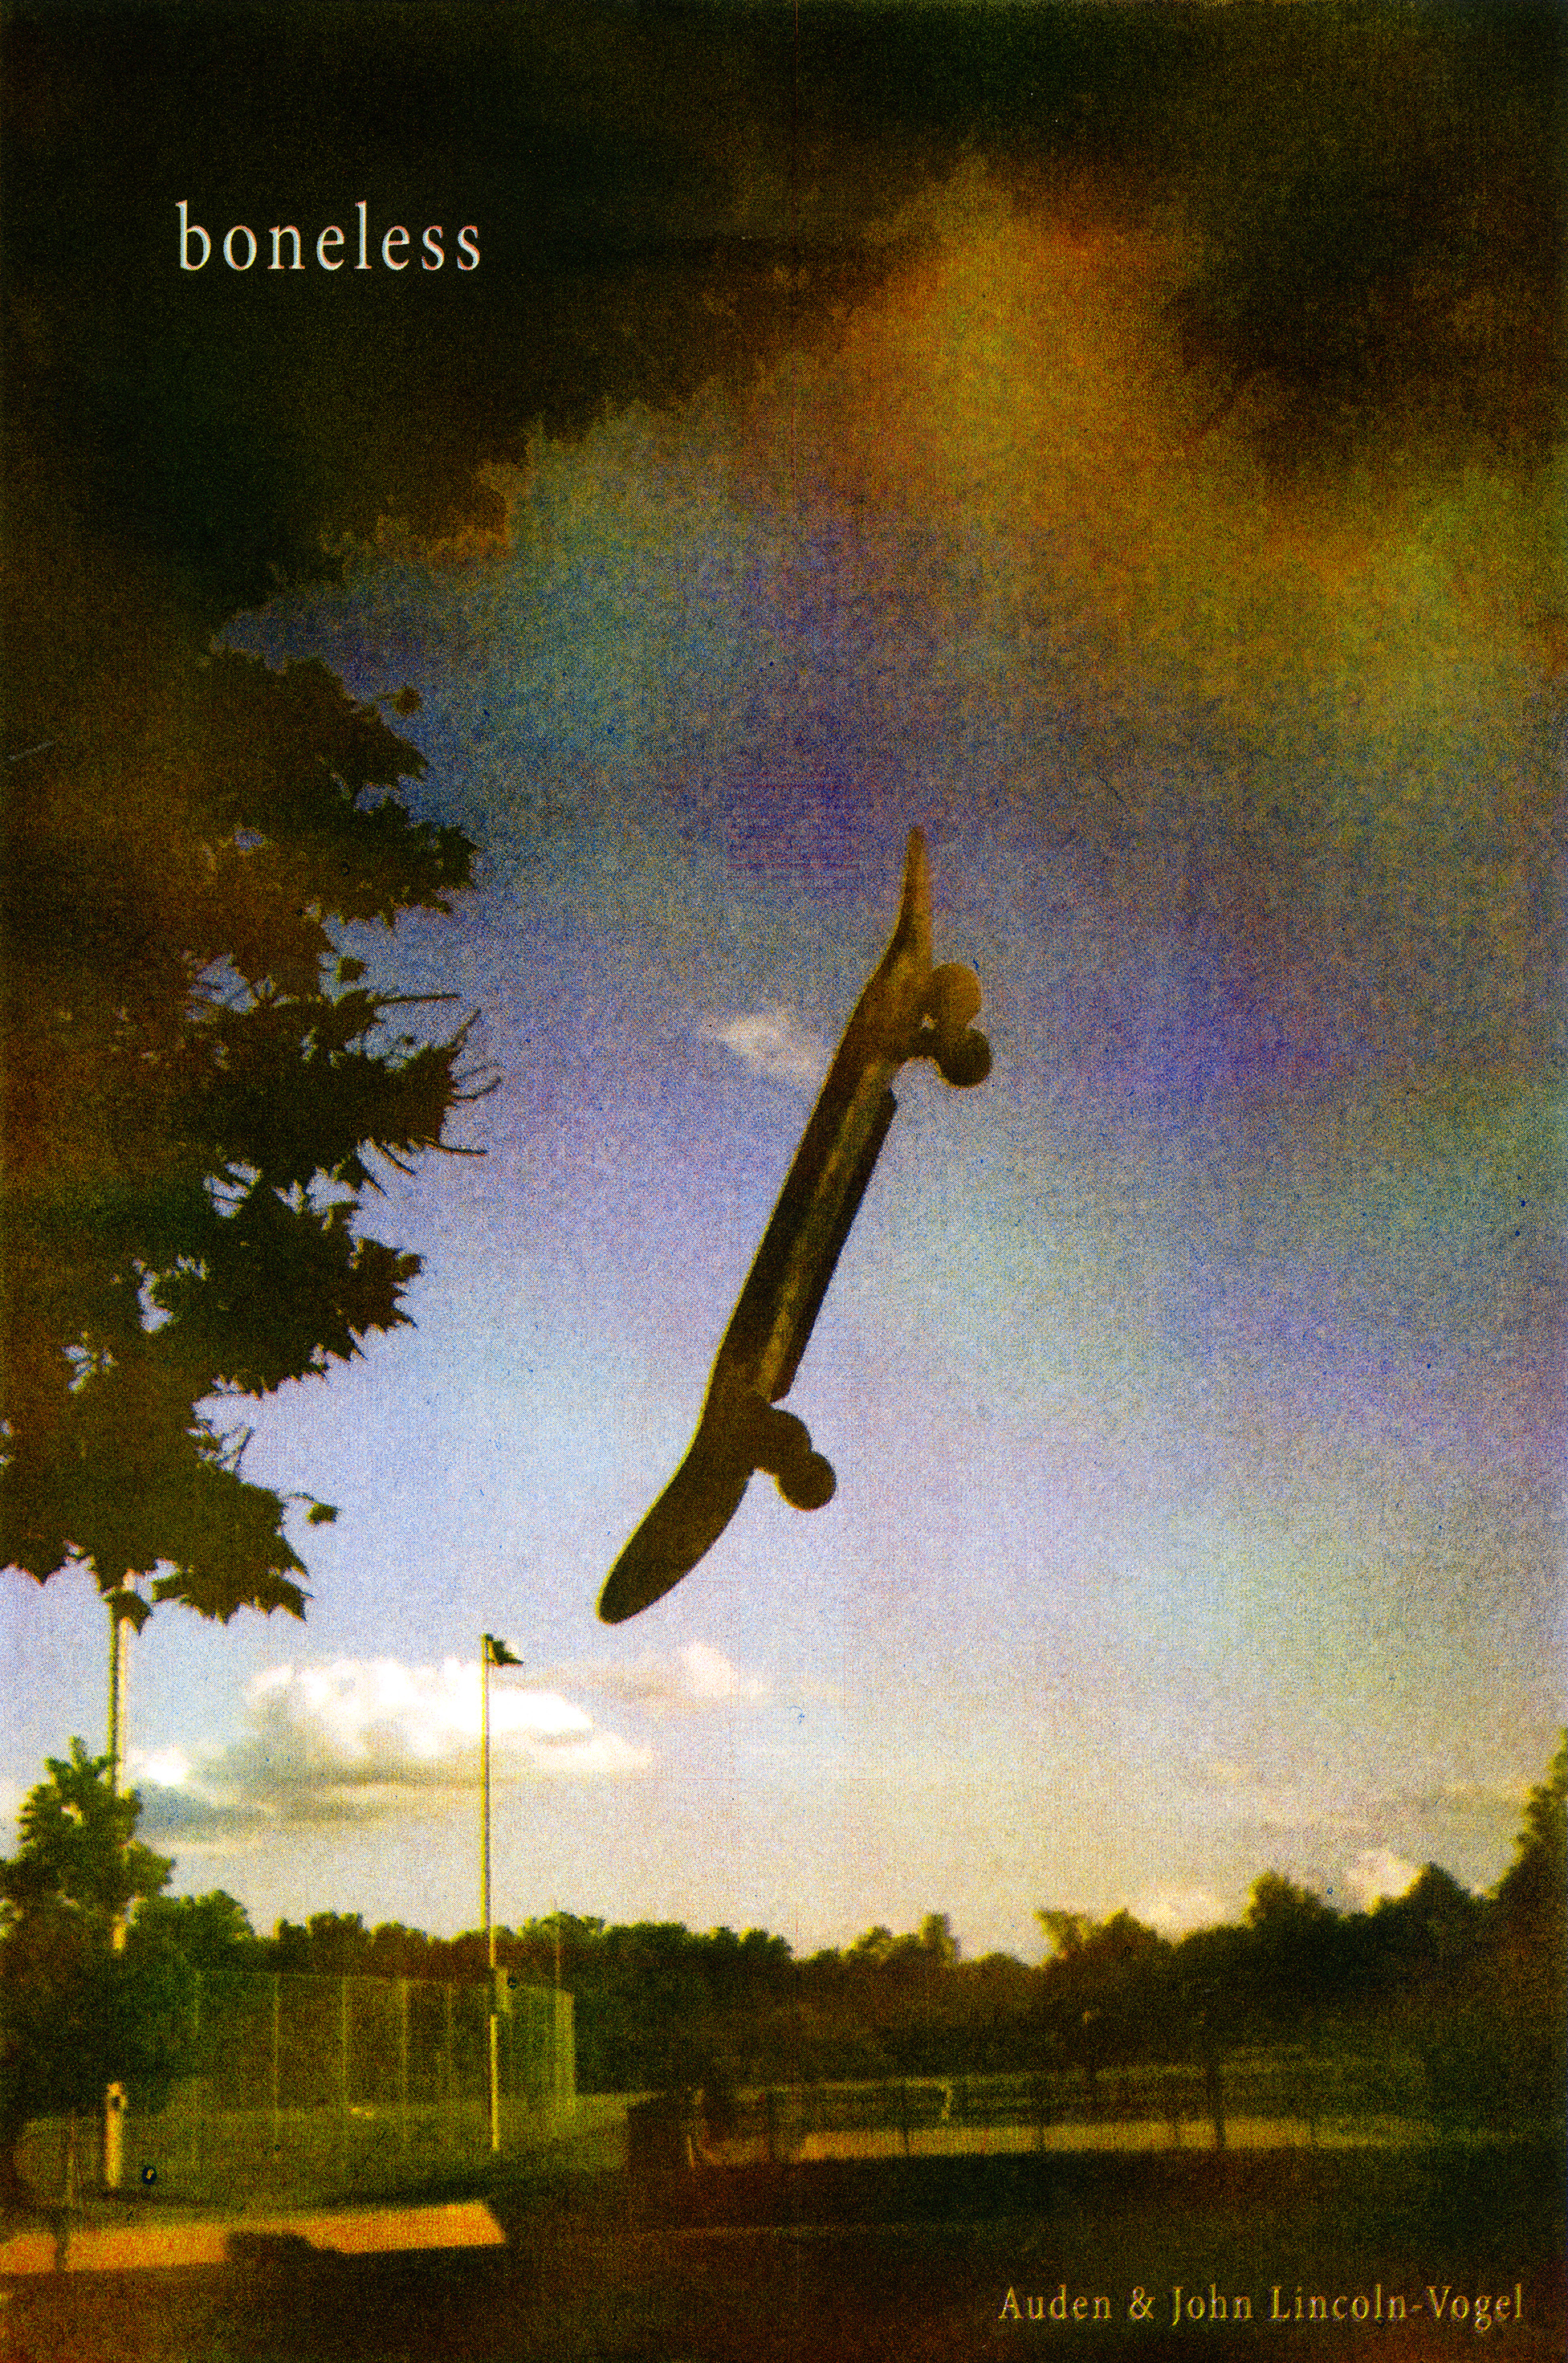 Film poster with skateboard in mid-air